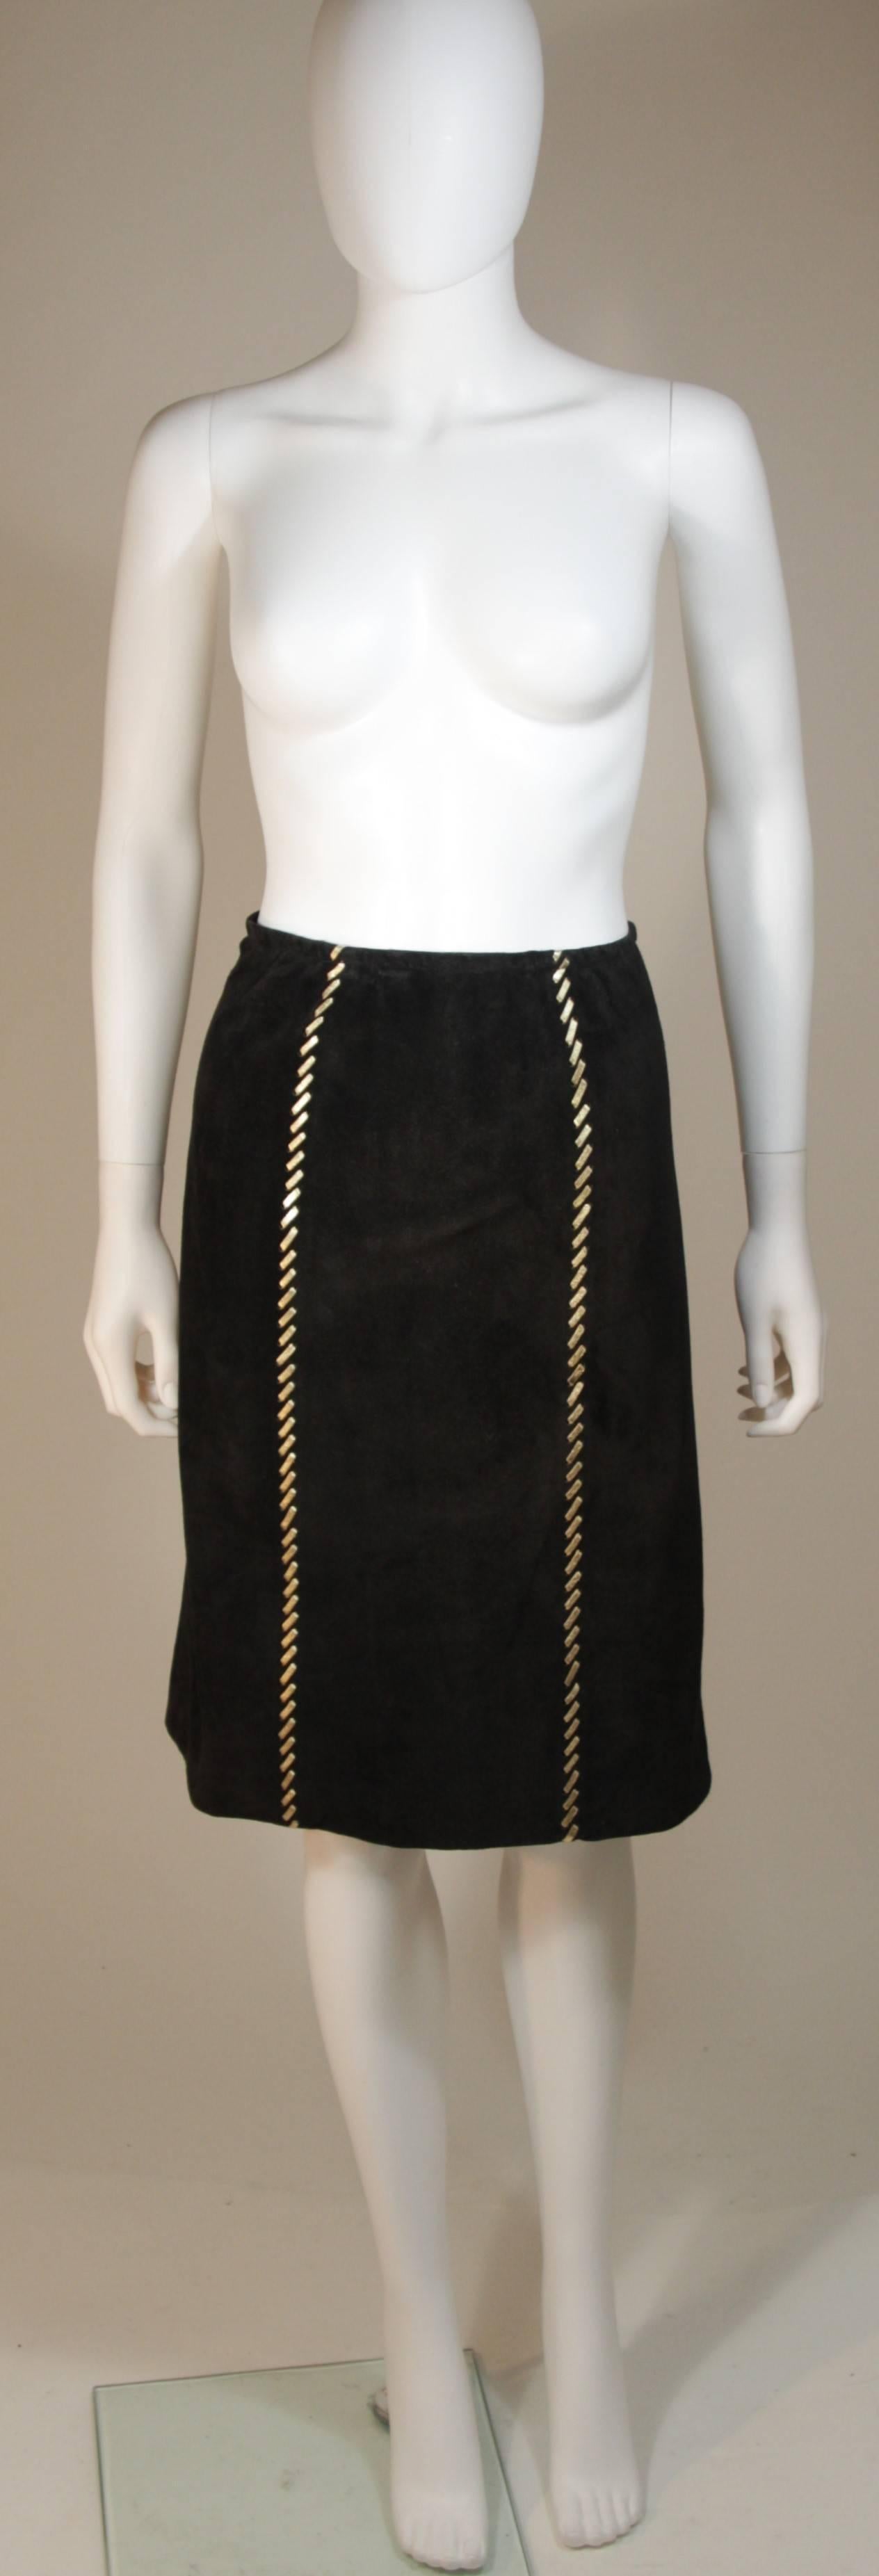 YVES SAINT LAURENT Black Suede Skirt with Gold Detail and Belt Size 36 For Sale 1